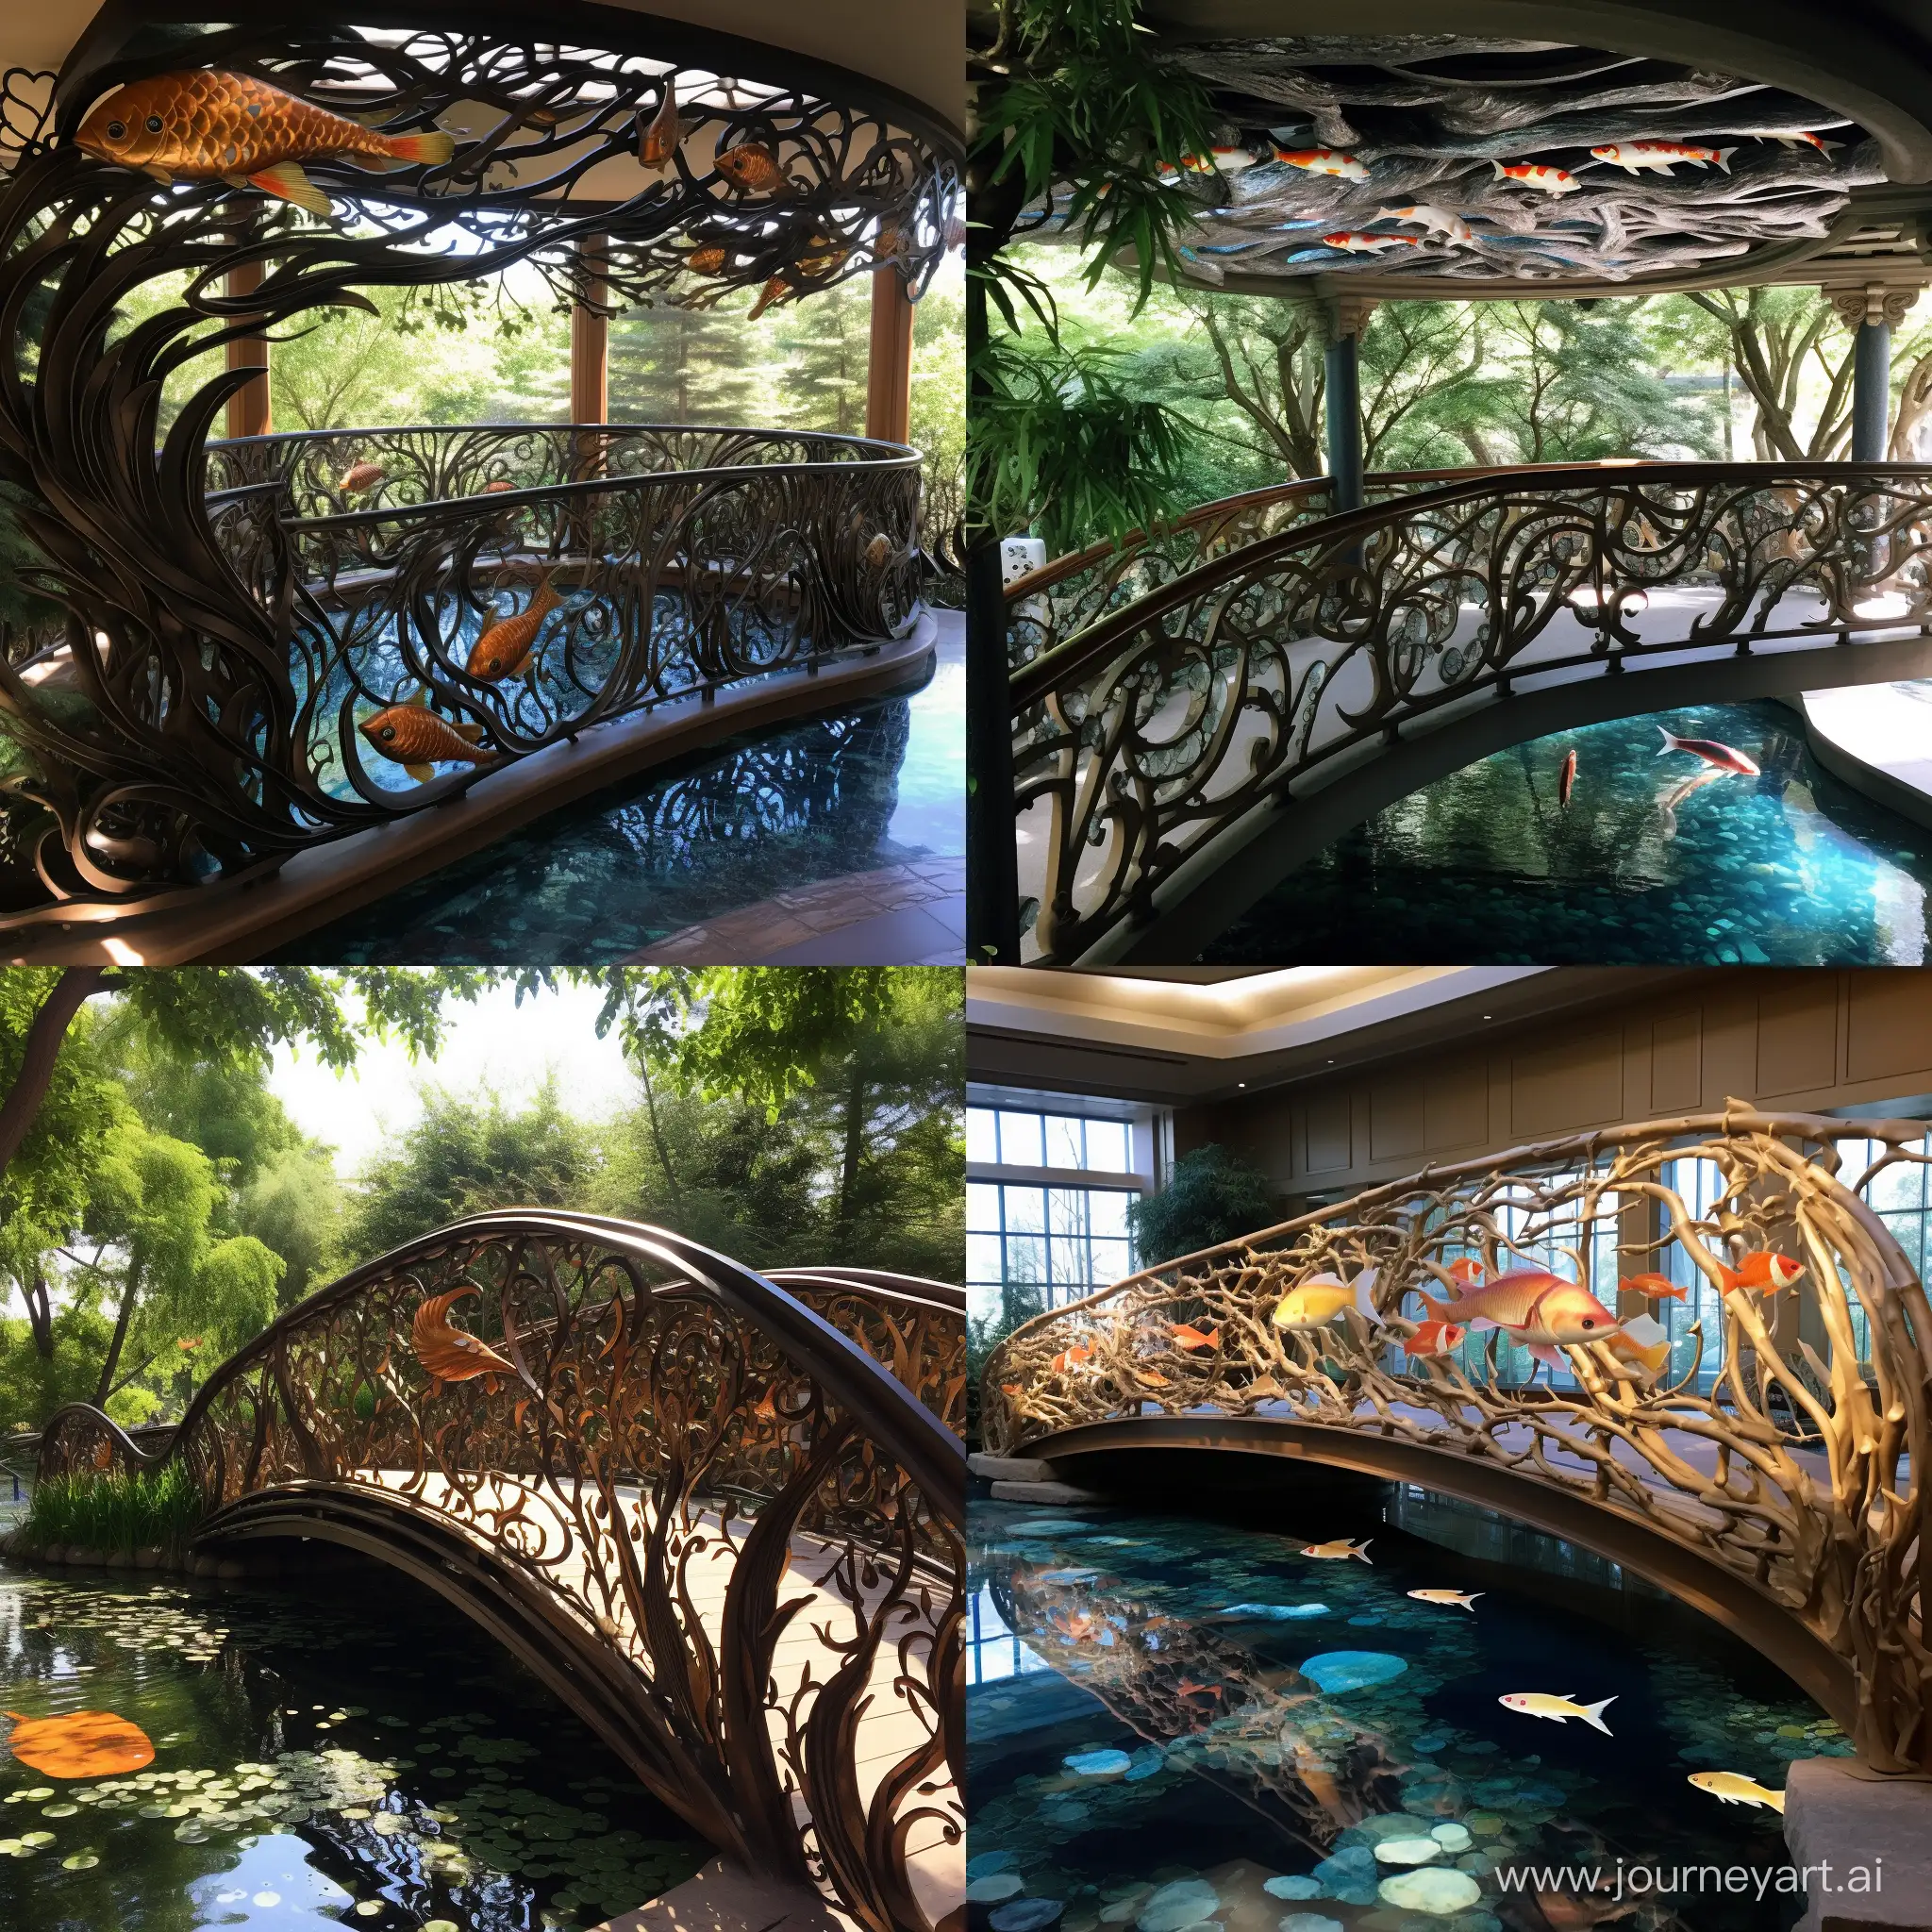 Tranquil-Bridge-with-Tree-Branch-Railings-and-Koi-Fish-in-Reflective-Pool